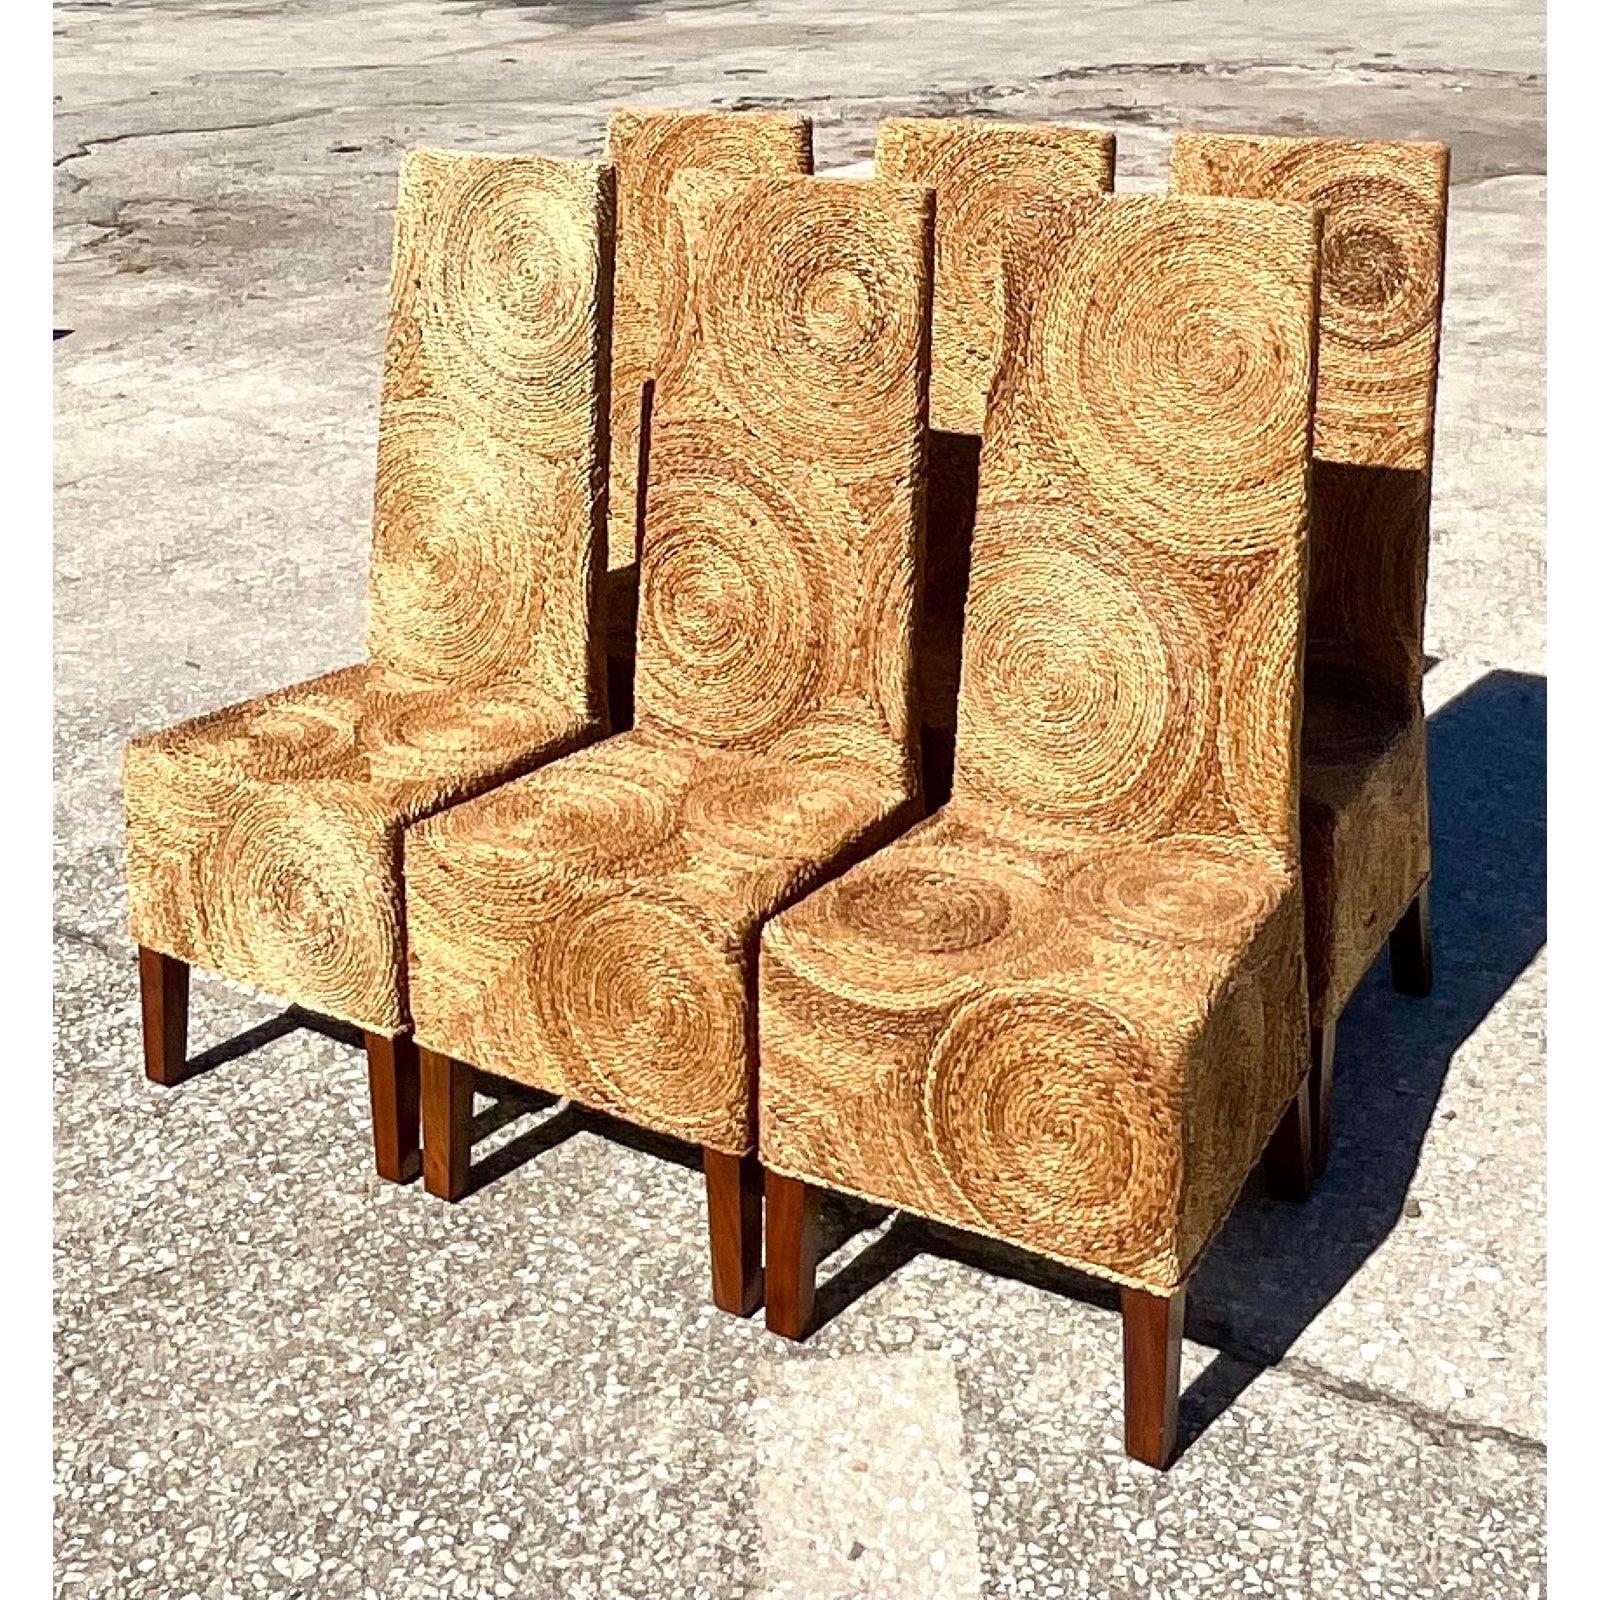 Fantastic vintage coastal dining chairs. Beautiful twisted rattan in a circles design. High backs and wood legs make these an easy addition to any décor. Acquired from a Palm Beach estate.